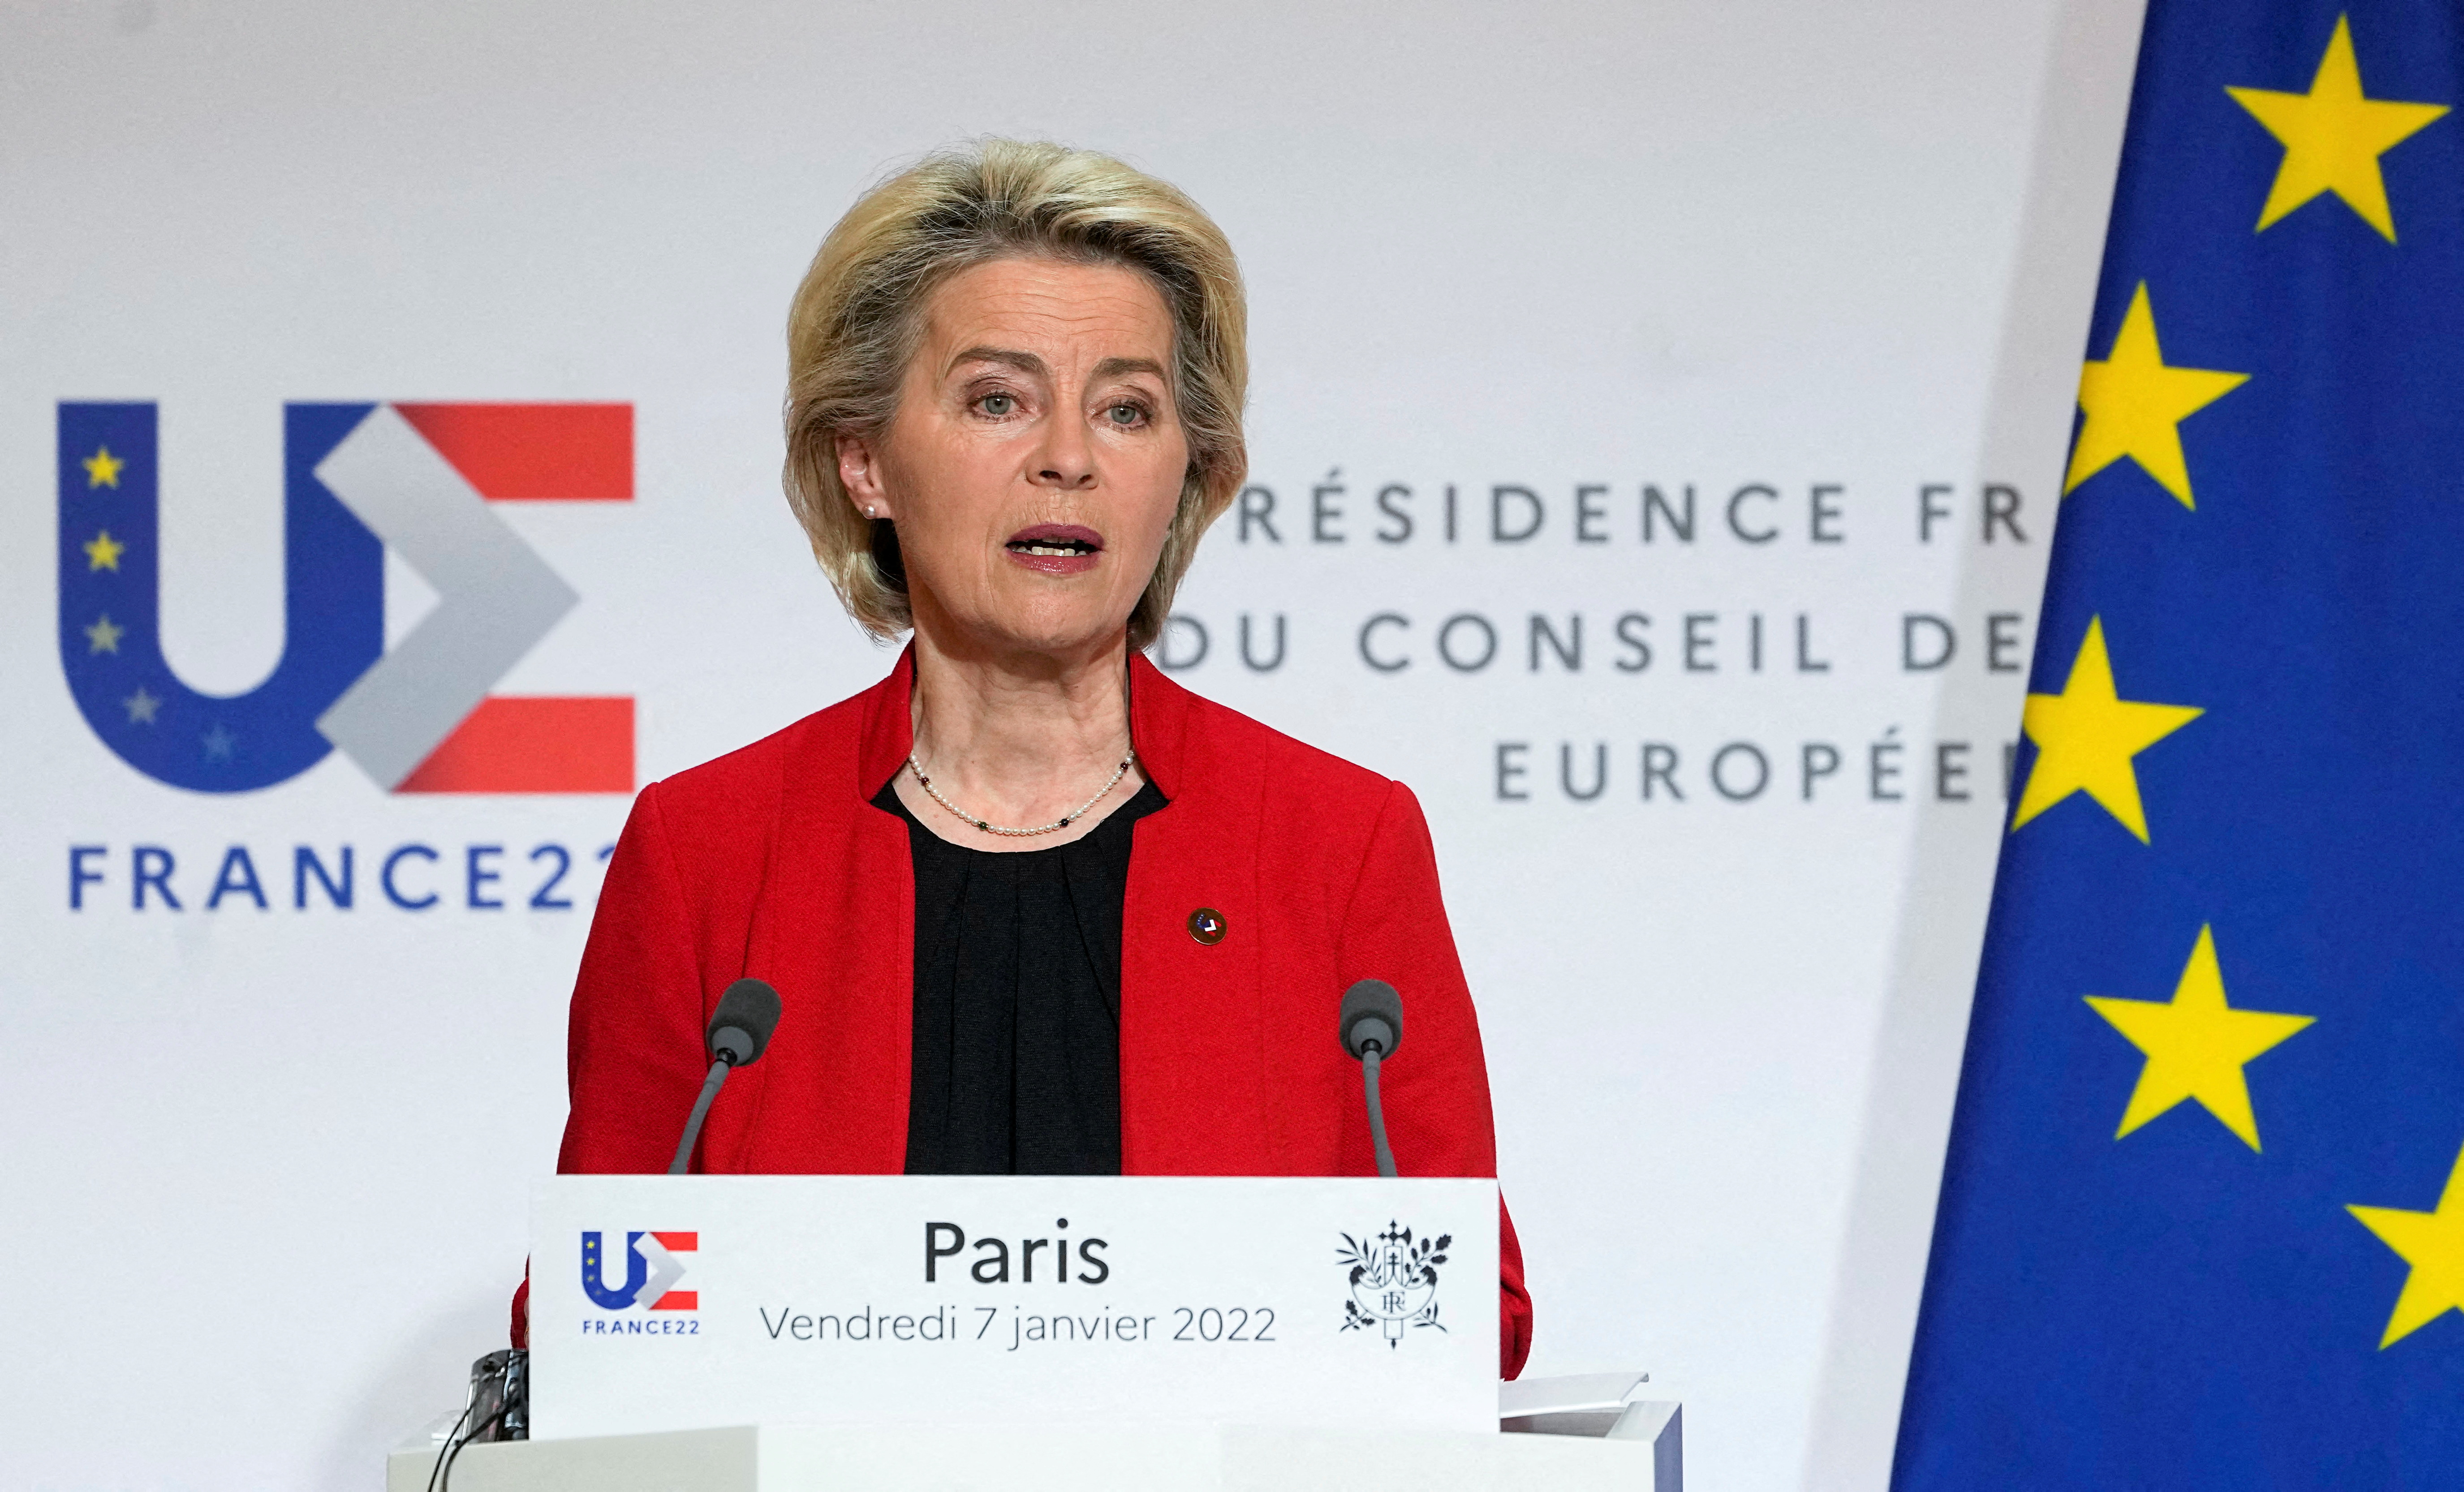 European Commission President Ursula von der Leyen speaks after a meeting at the Elysee Palace in Paris, France, January 7, 2022. Michel Euler/Pool via REUTERS